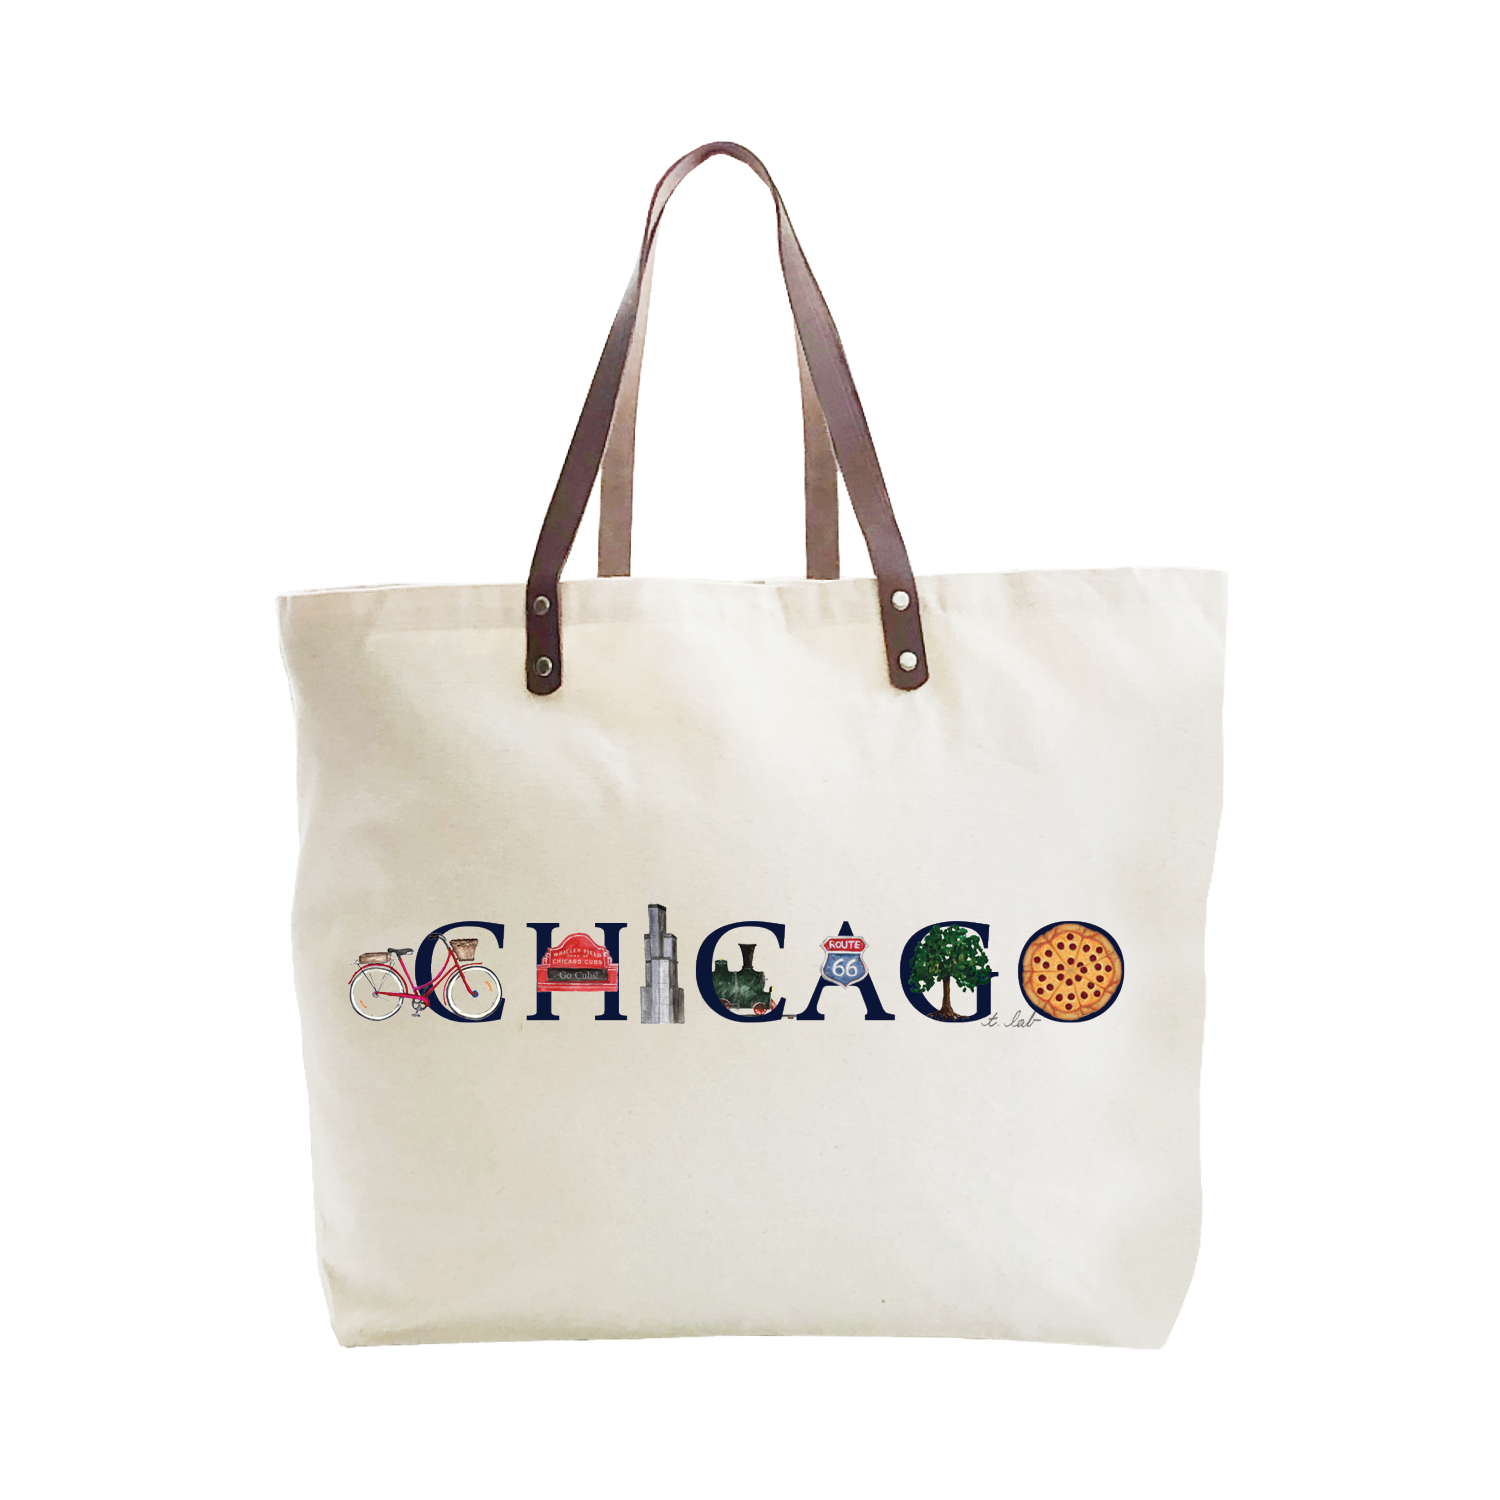 chicago large tote